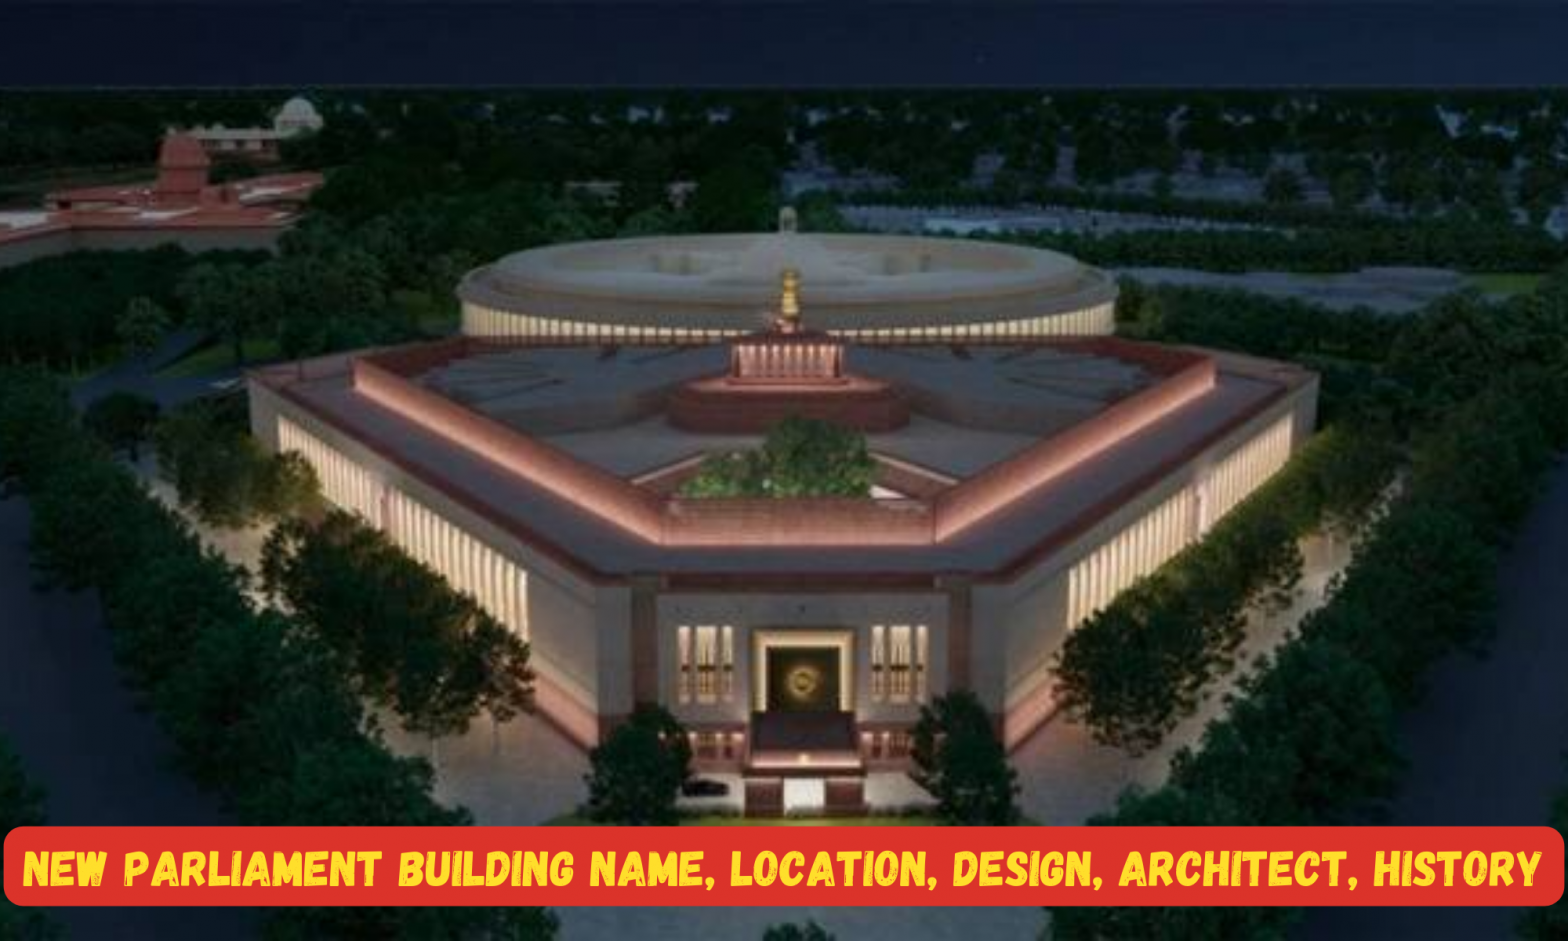 New Parliament Building Name, Location, Design, Architect, History